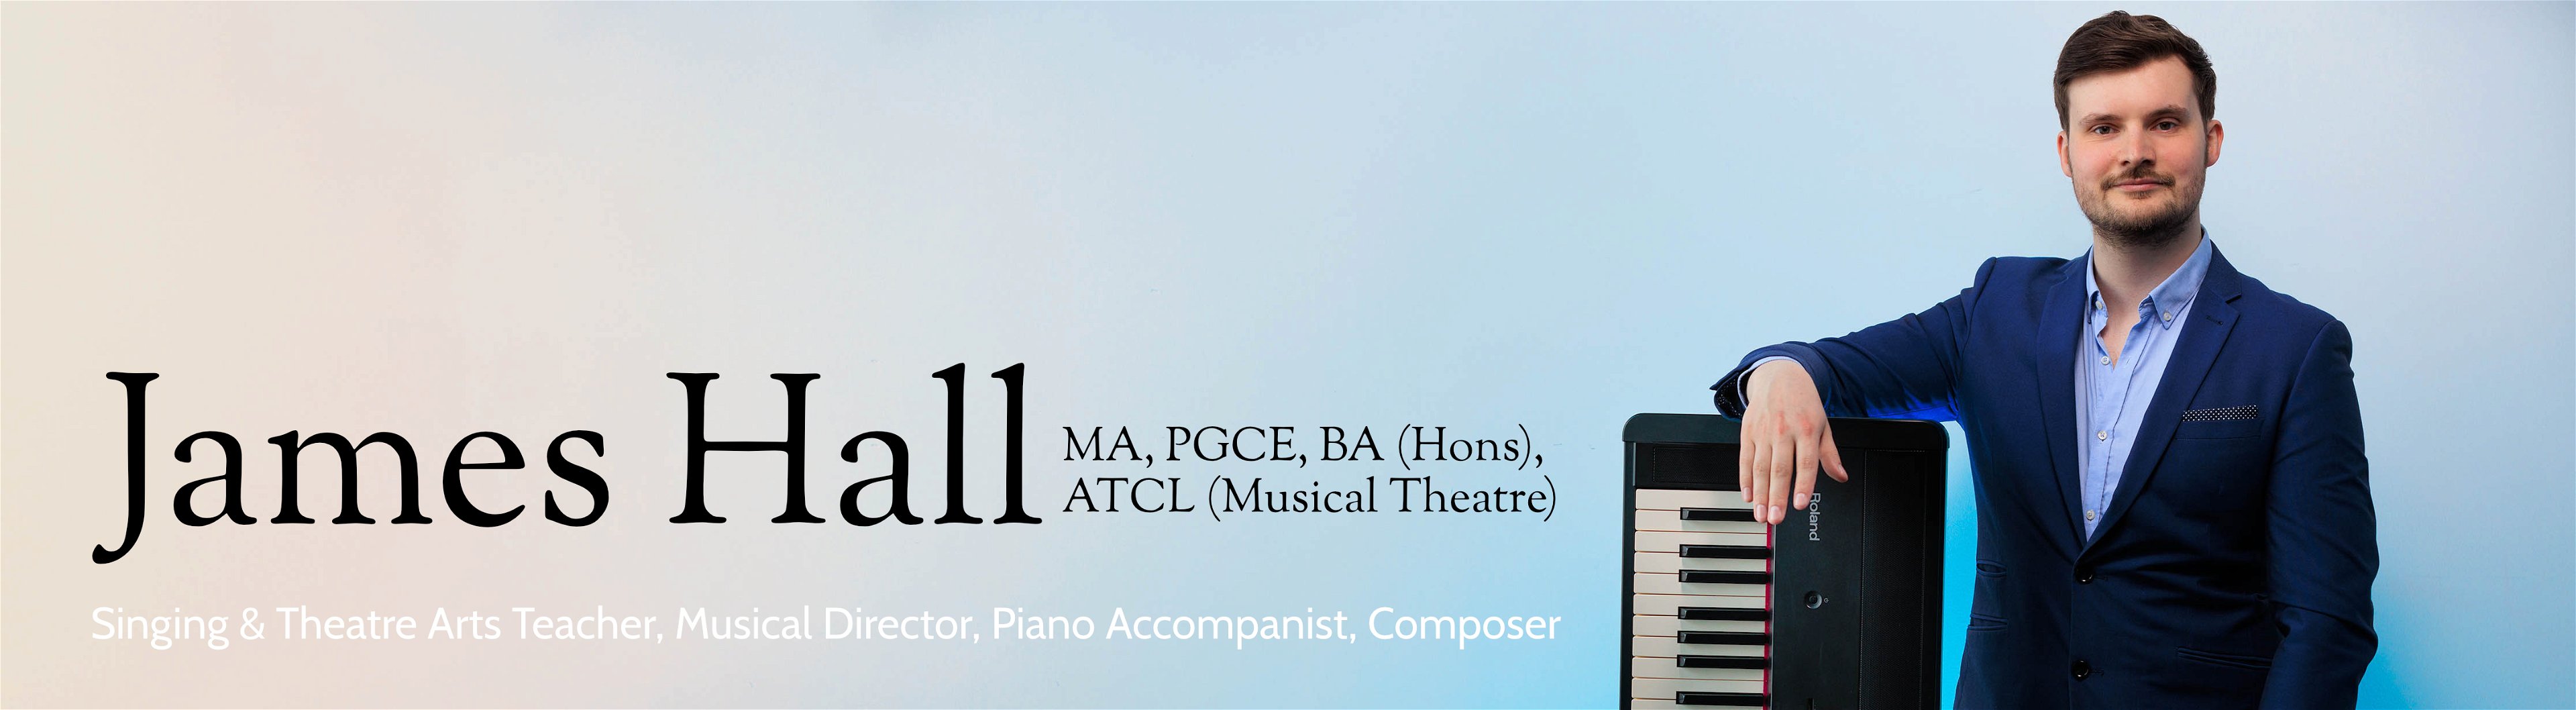 James Hall: Singing & Theatre Arts Teacher | Musical Director | Piano Accompanist | Composer